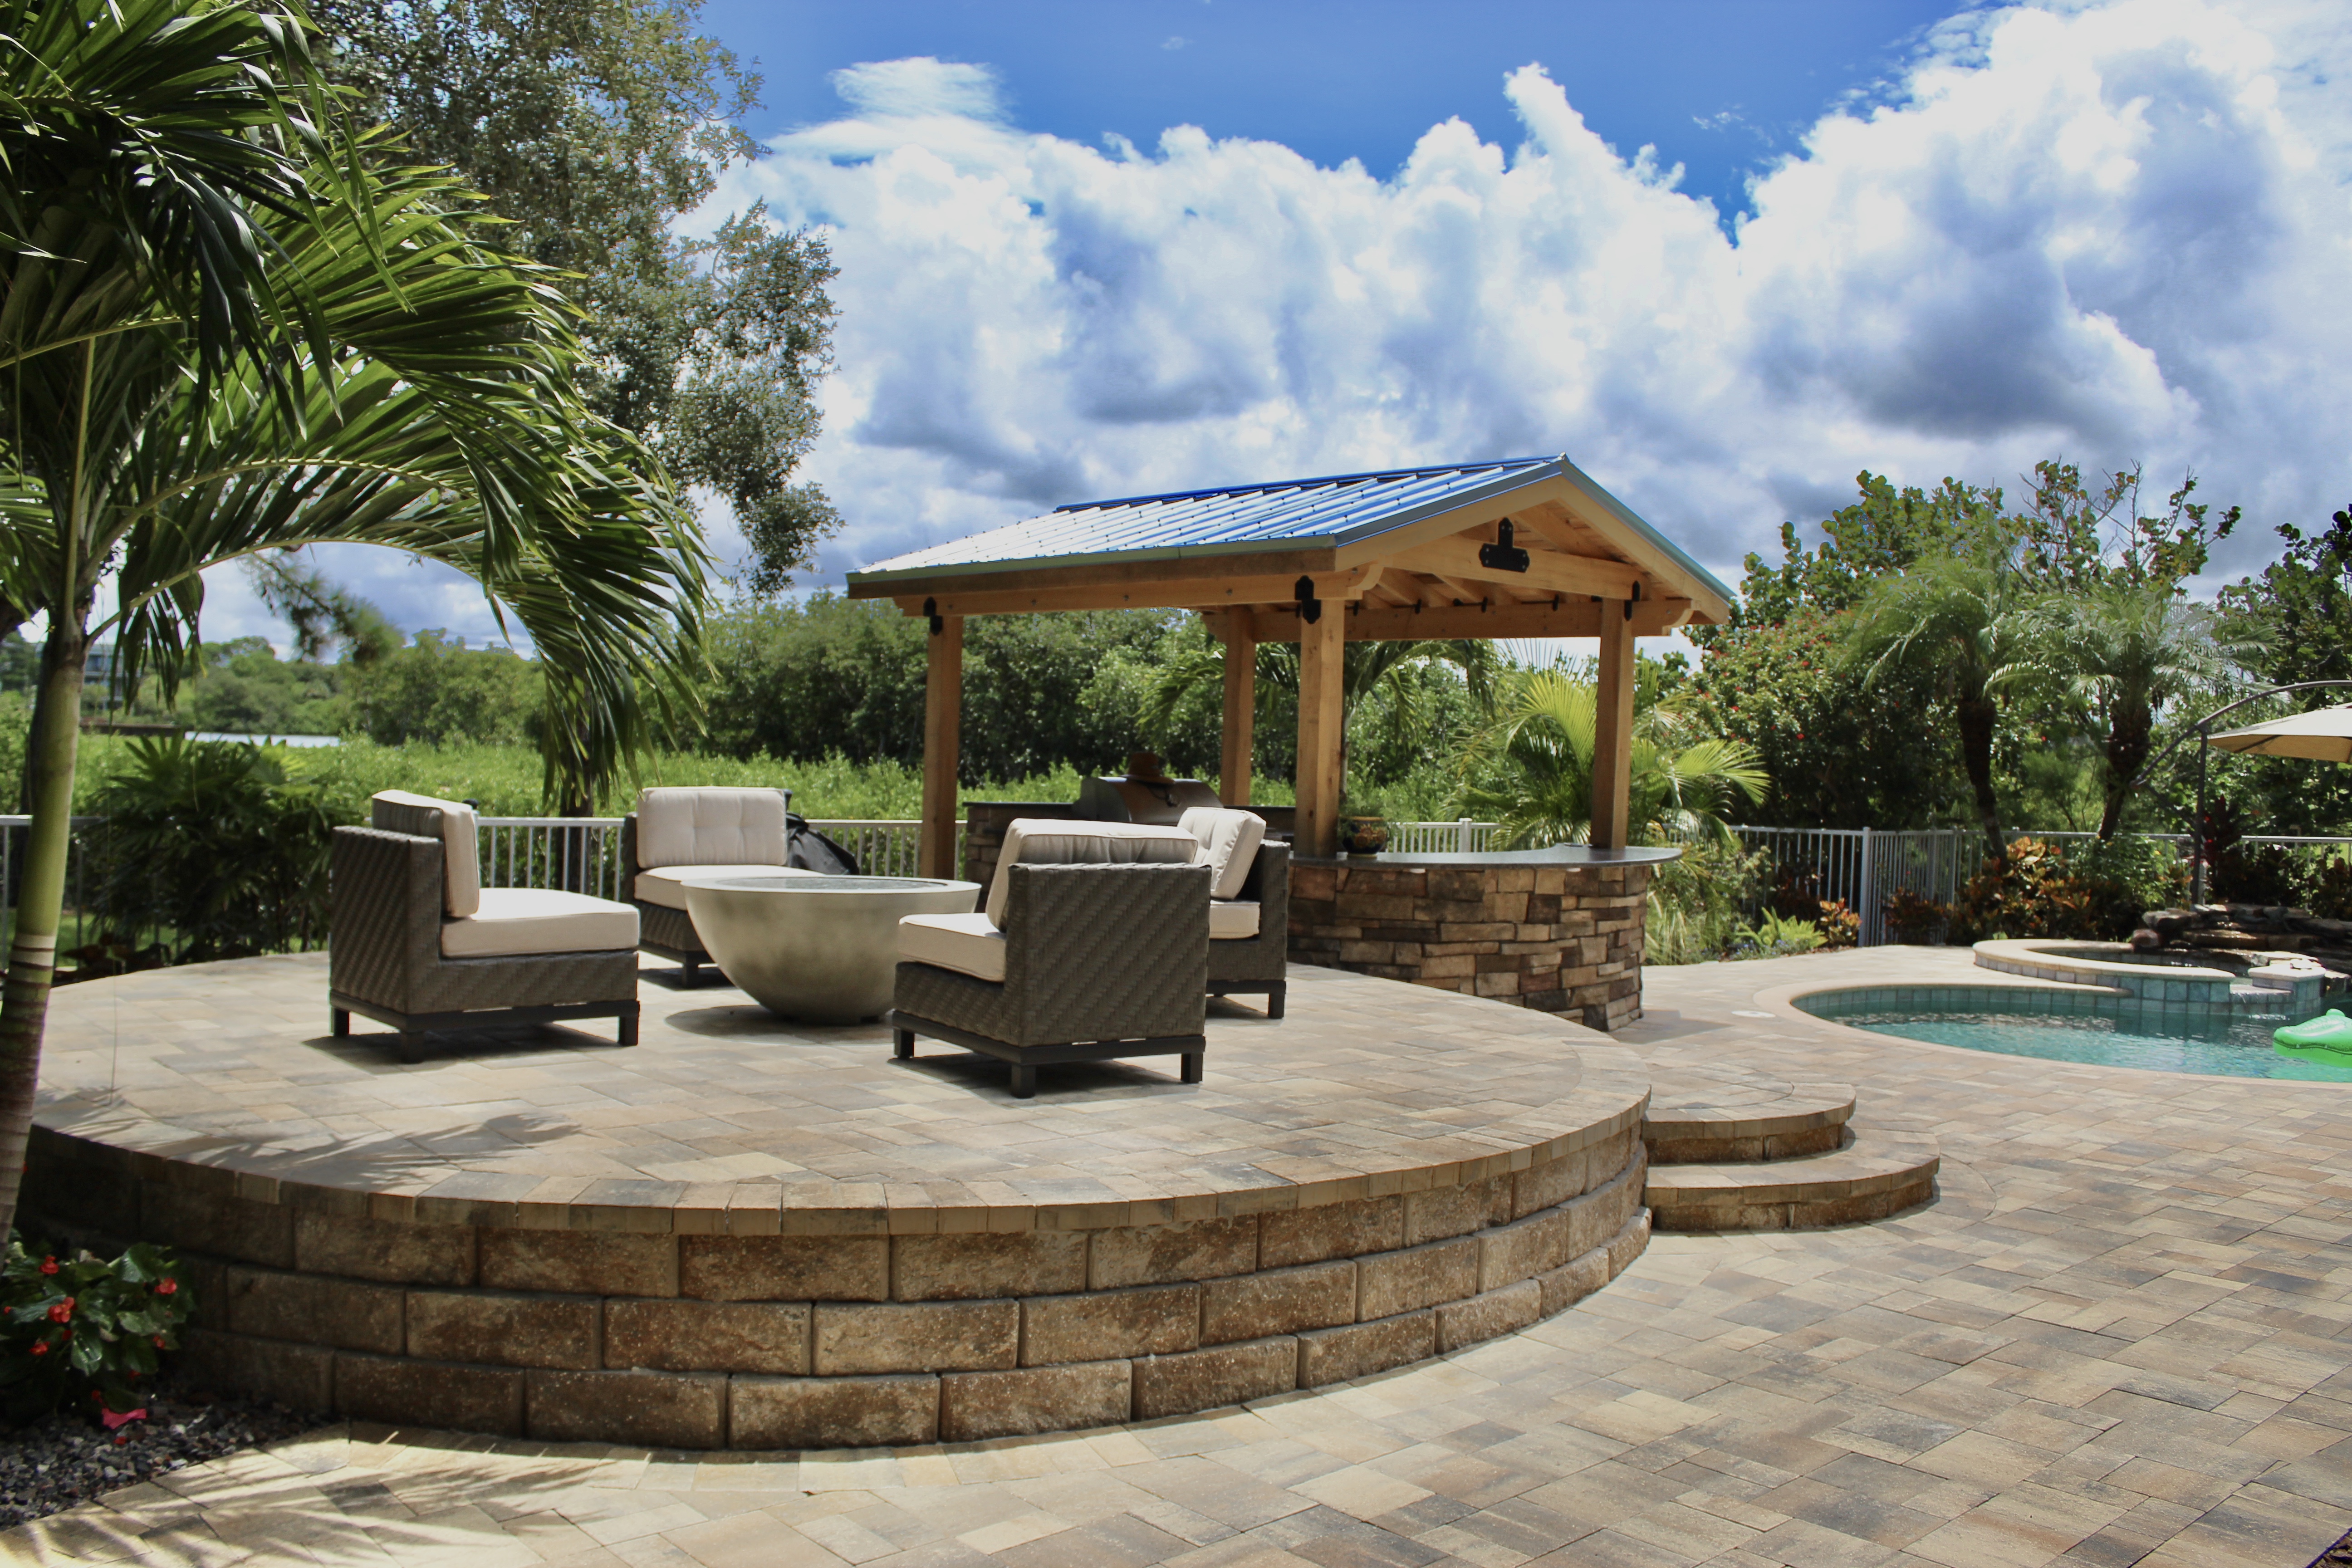 Patio remodel in Palm Harbor FL | Earthscapes Garden Room